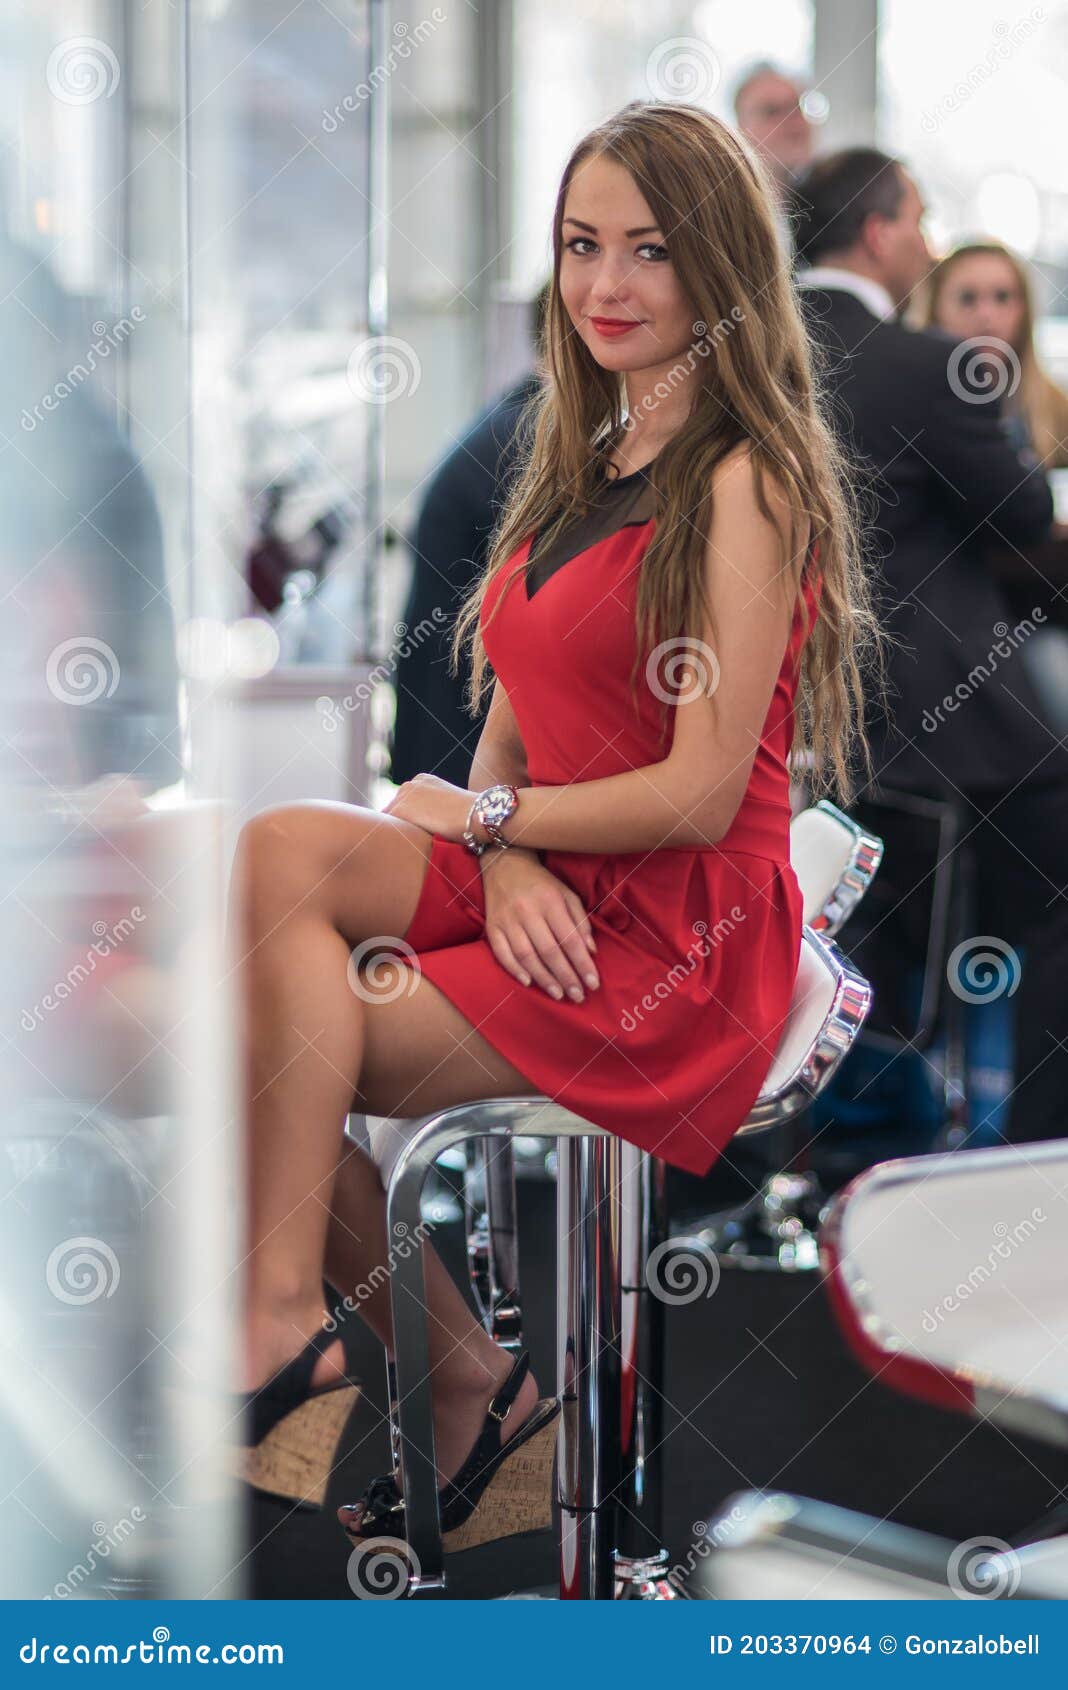 A Woman Working At The Amper Convention At The Brno Exhibition Center Czech Republic Editorial